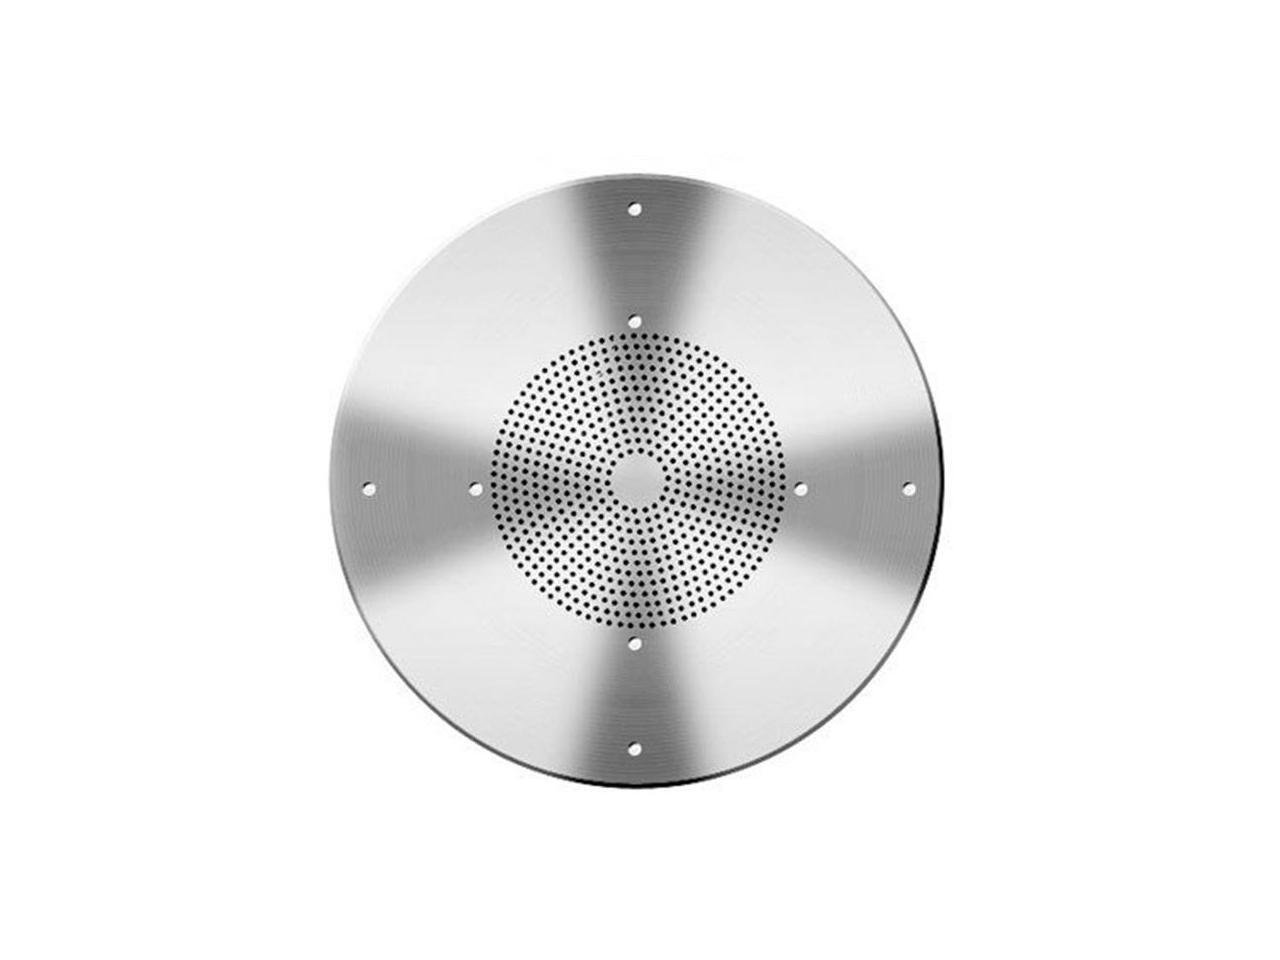 CEILING BAFFLE FOR 8- SPEAKERS ROUND STEEL GRILLE, OFF-WHITE - Newegg.com